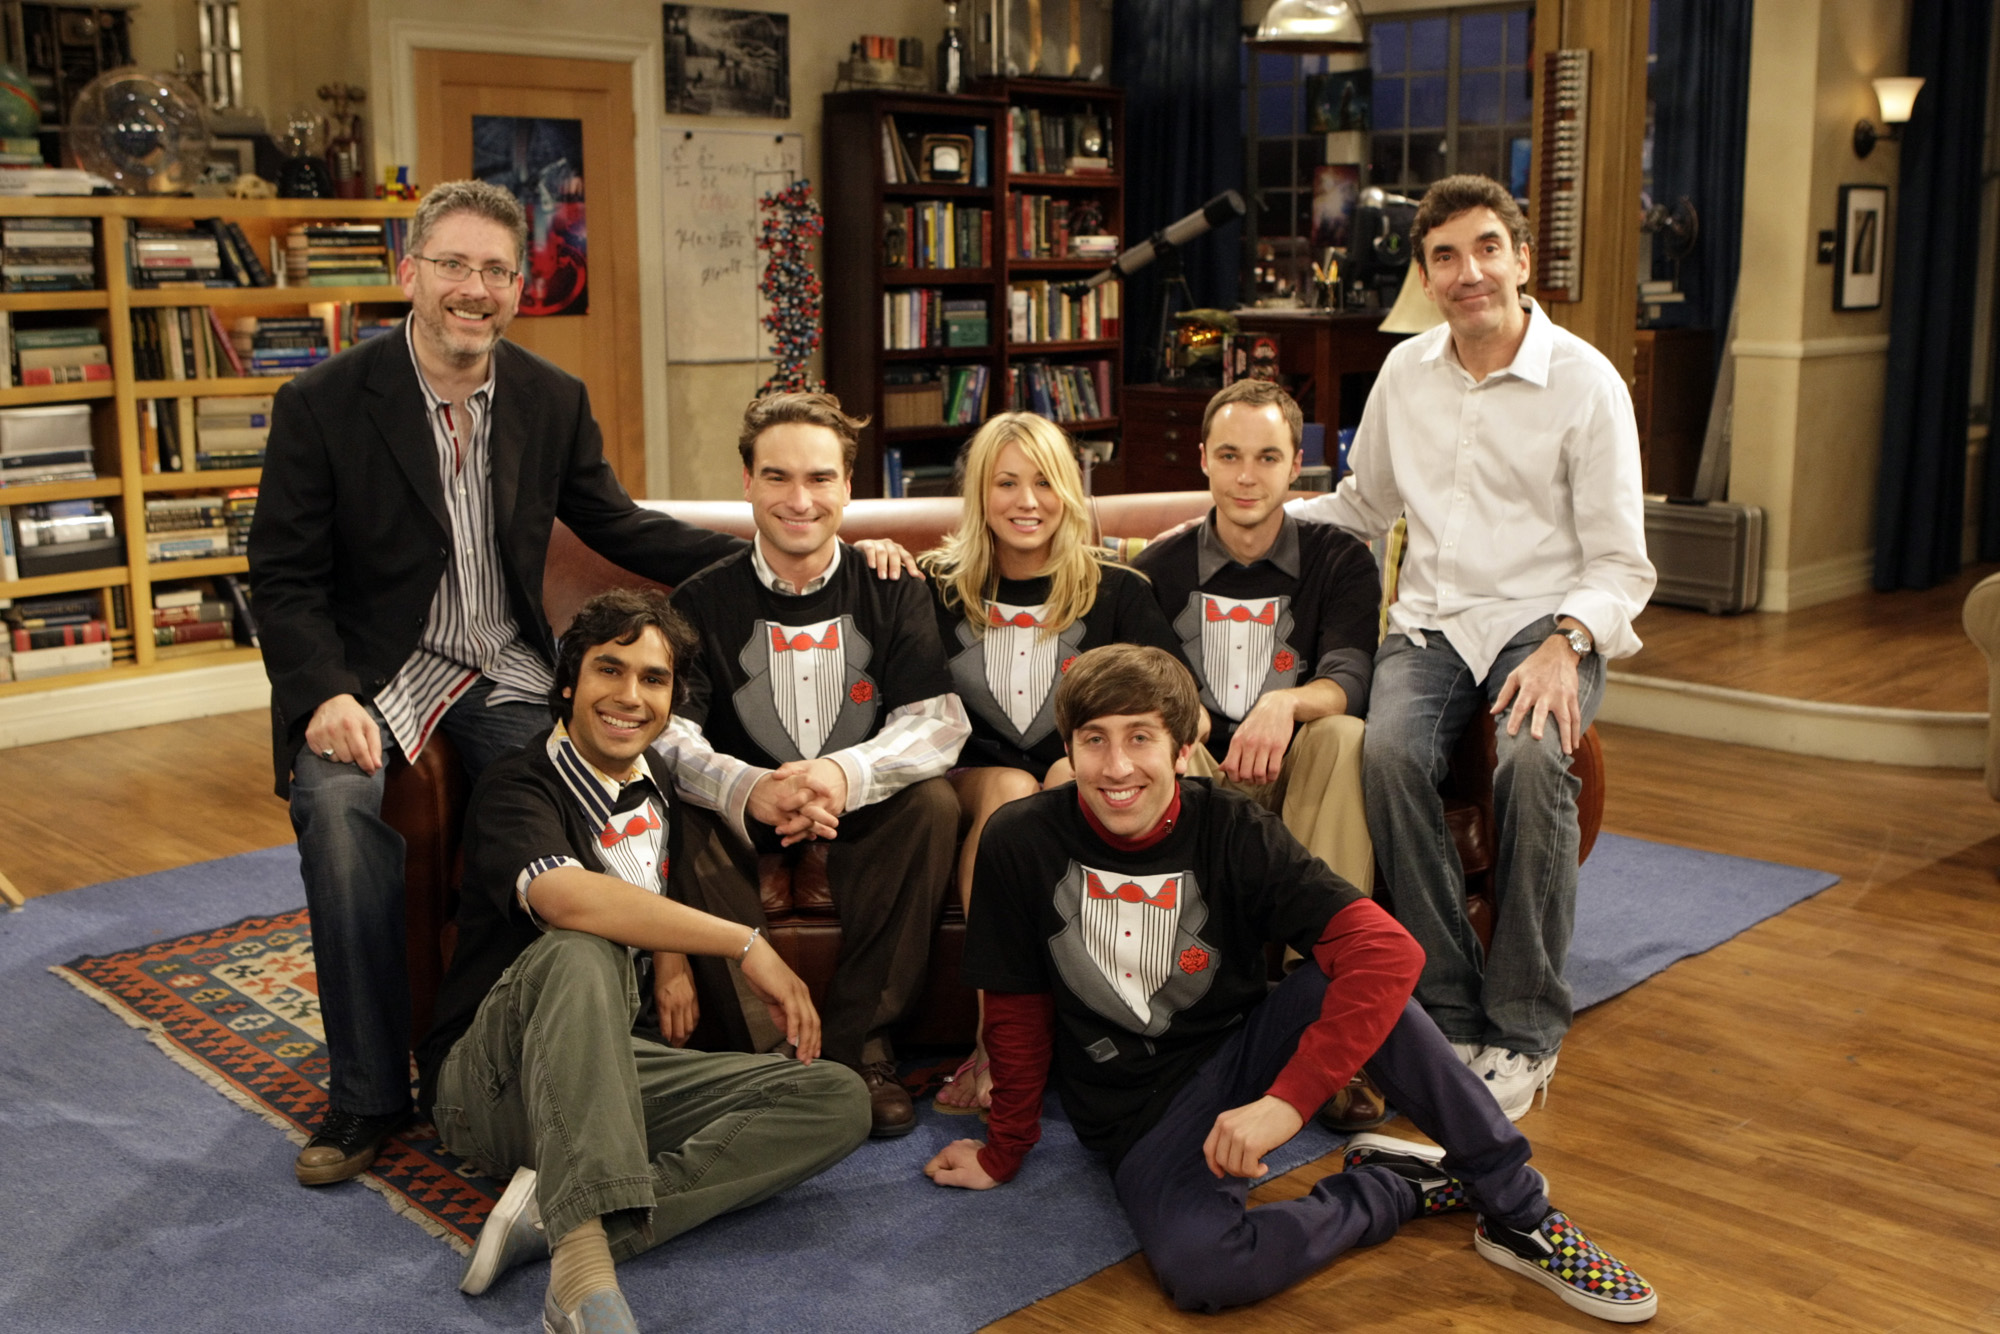 The Big Bang Theory Pictures & Wallpapers.